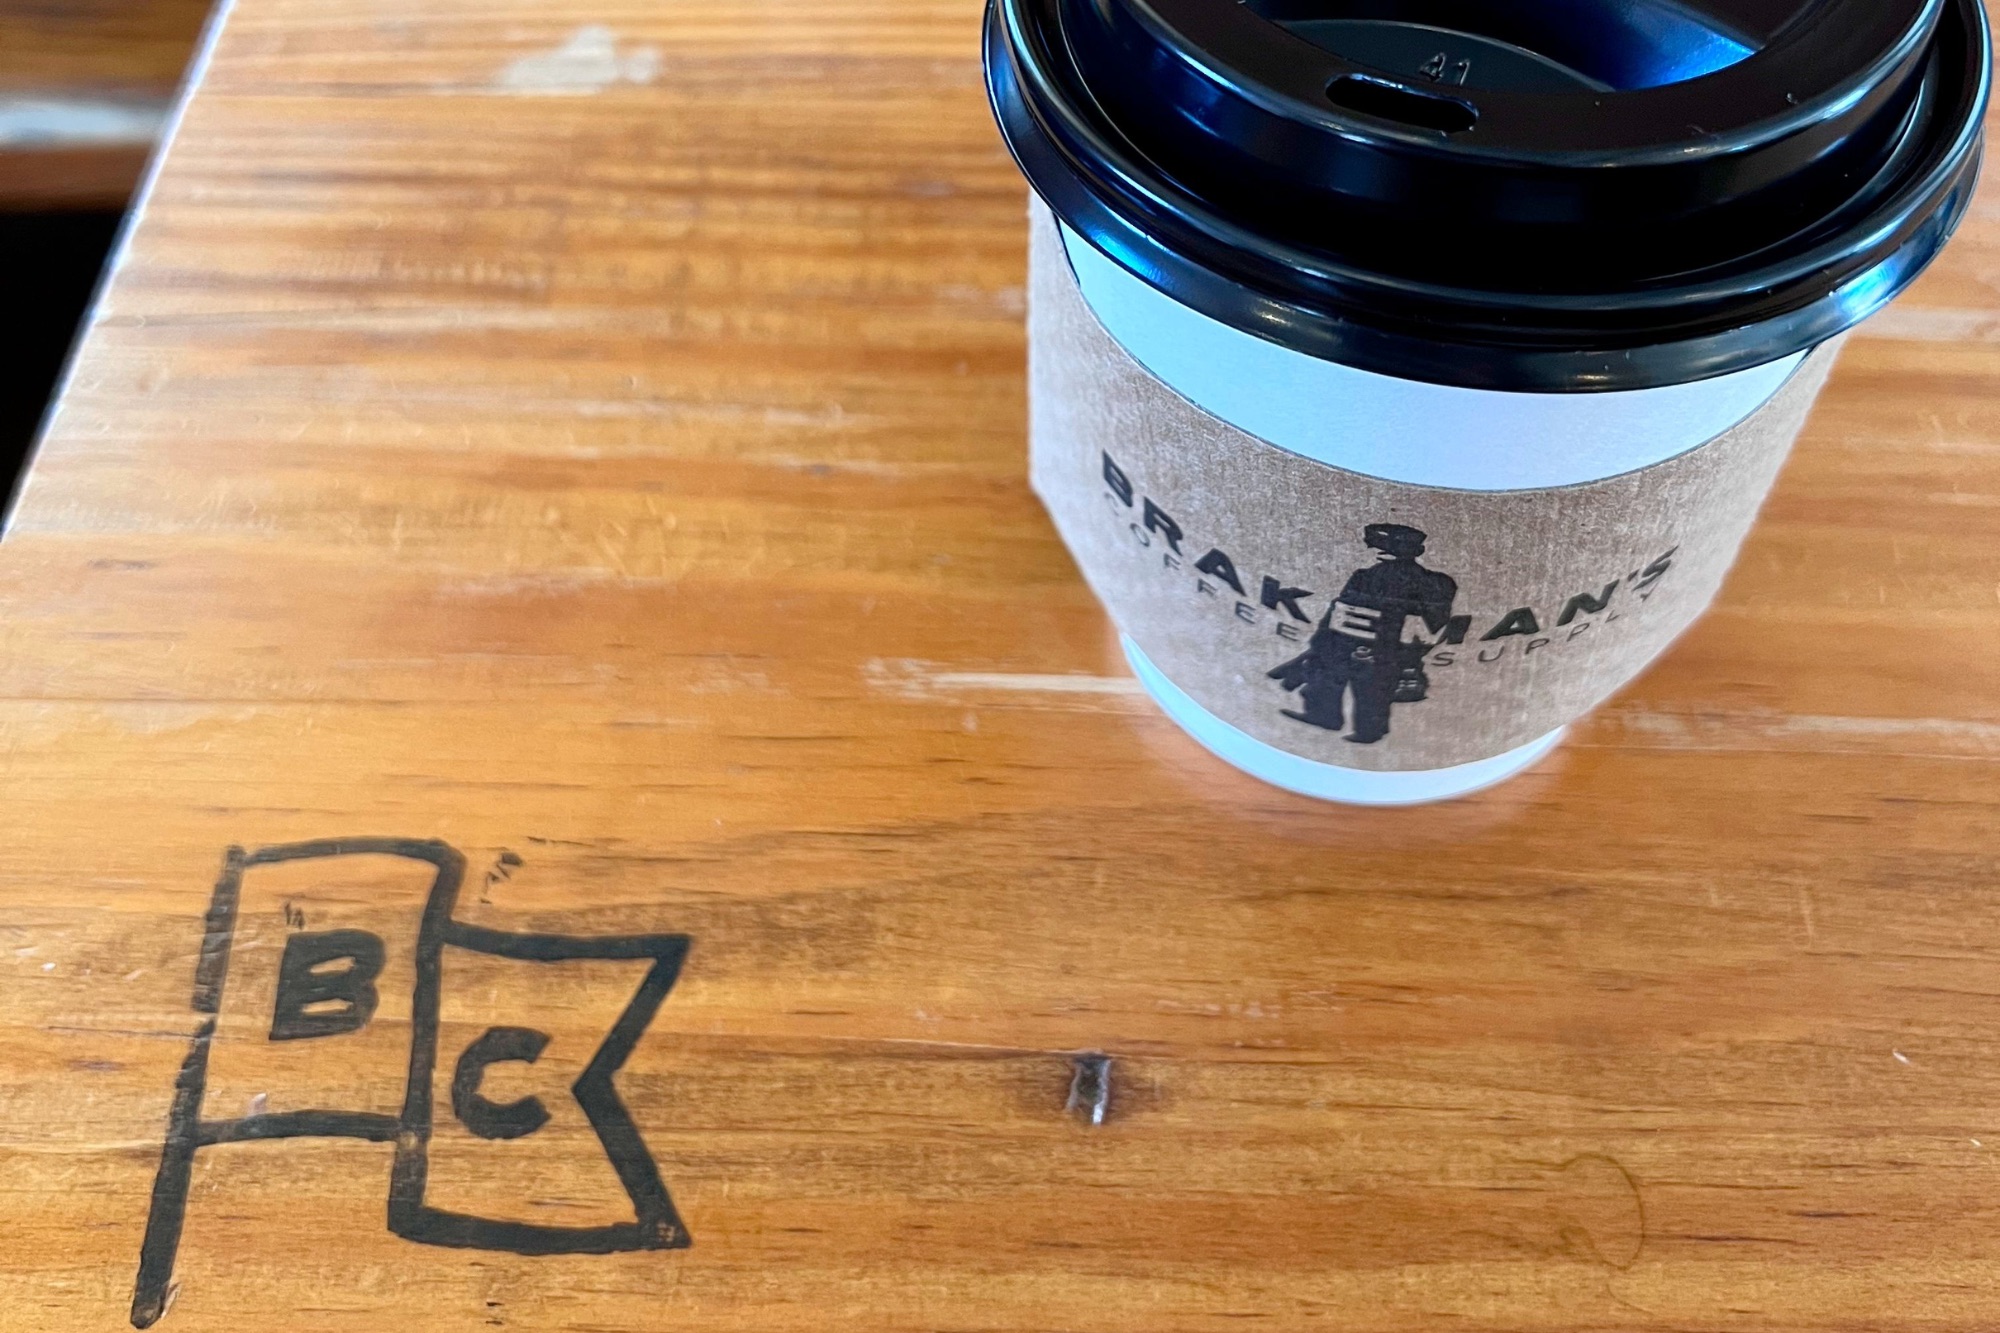 A coffee cup on a table with a logo for Brakemans.